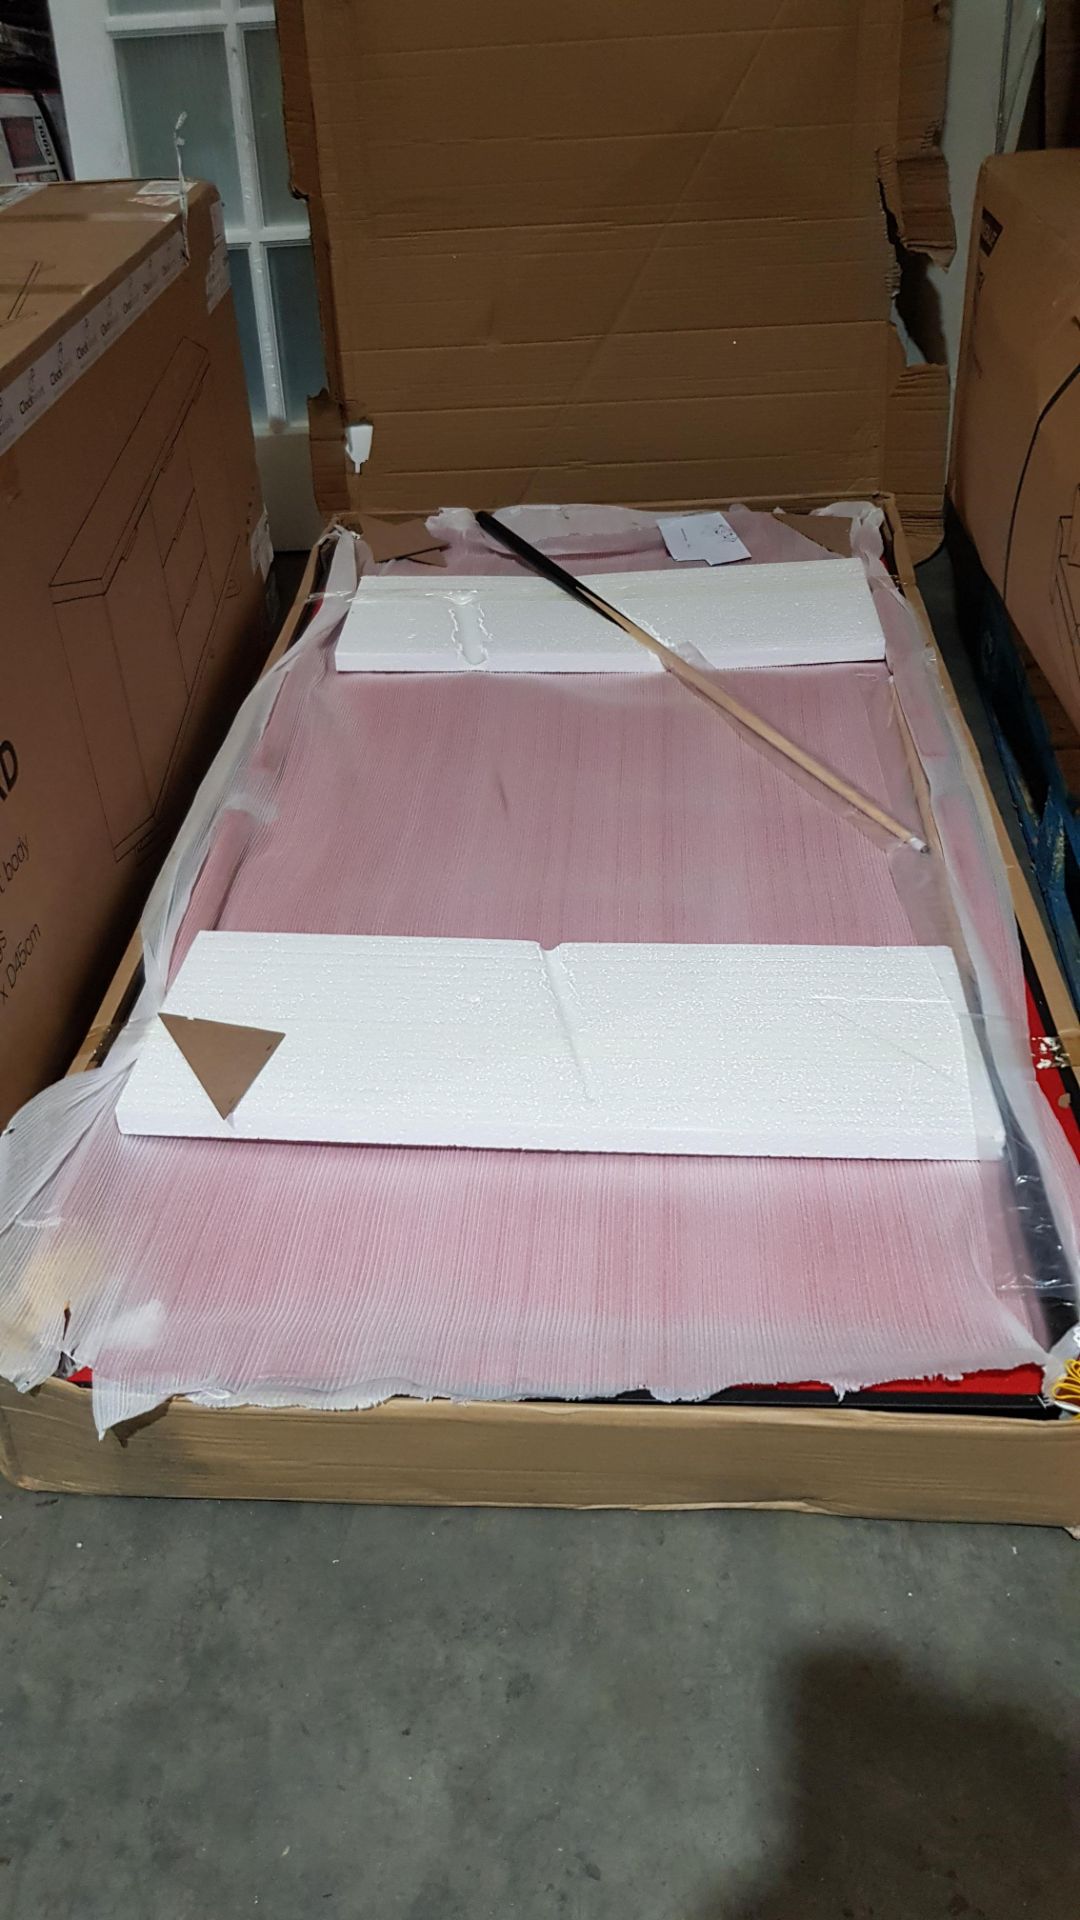 1 X 6ft Foldable Pool Table Main Body. Cloth Colour Red. Carton 1 Of 2 (L192.5 x W100 x D13.5cm) - Image 2 of 5